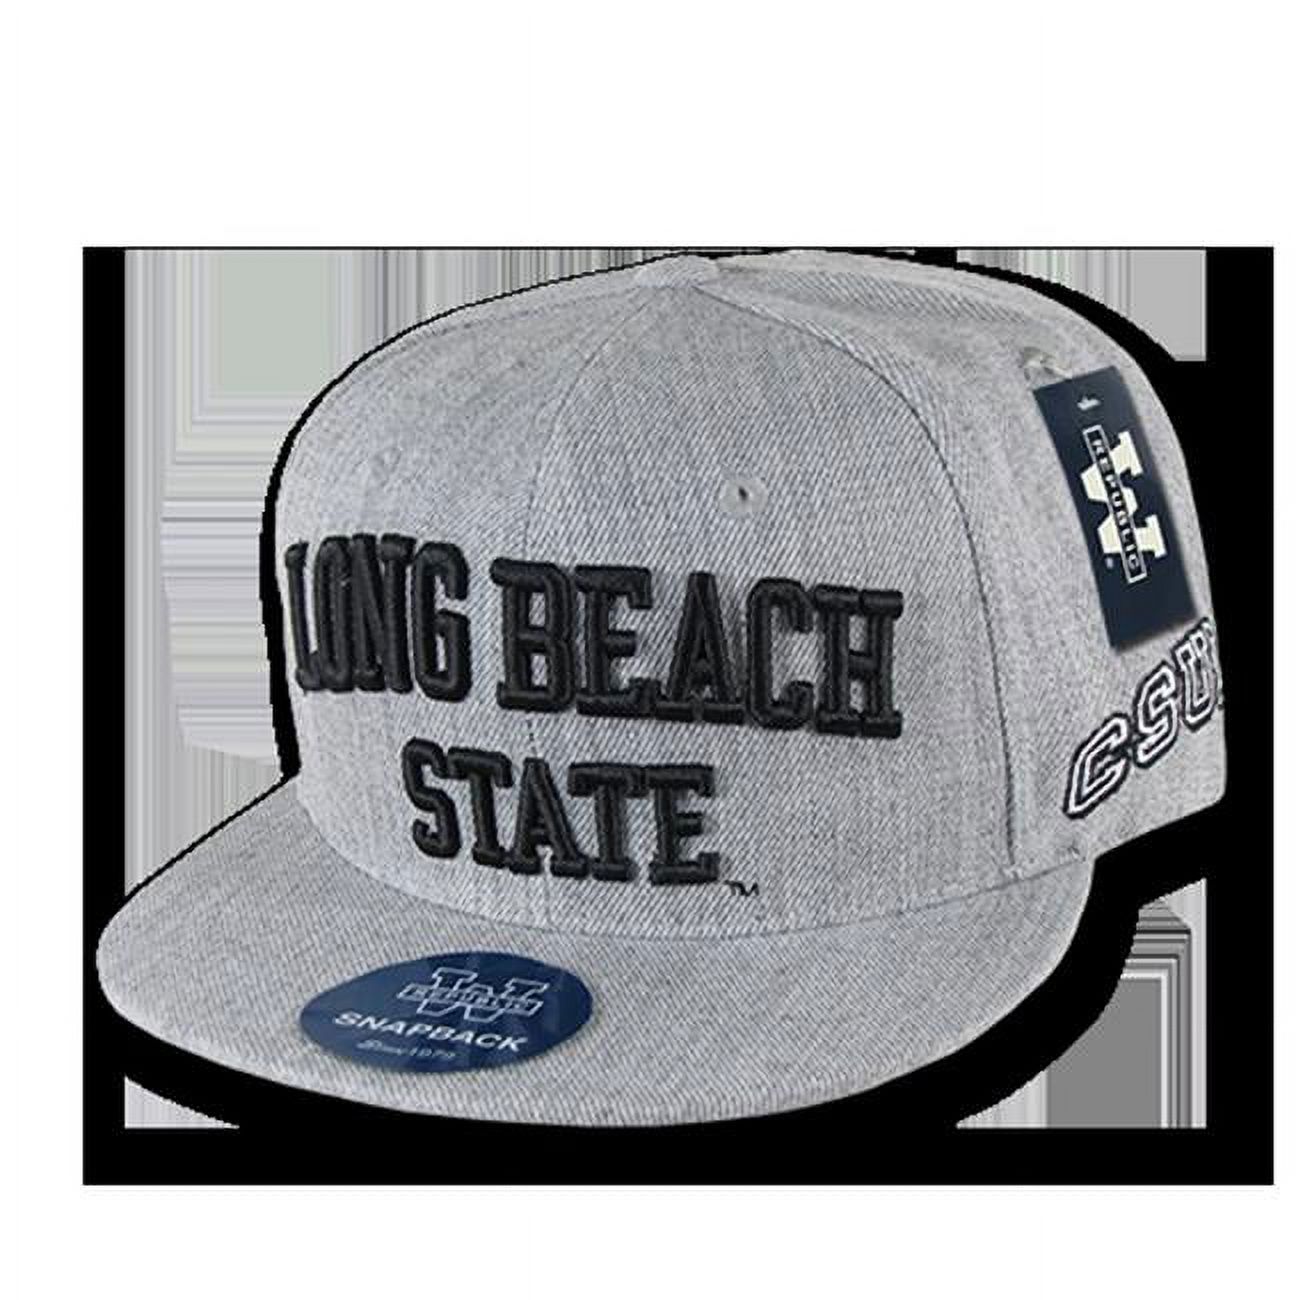 W Republic Game Day Fitted Long Beach State- Heather Grey - Size 7.25 - image 1 of 2